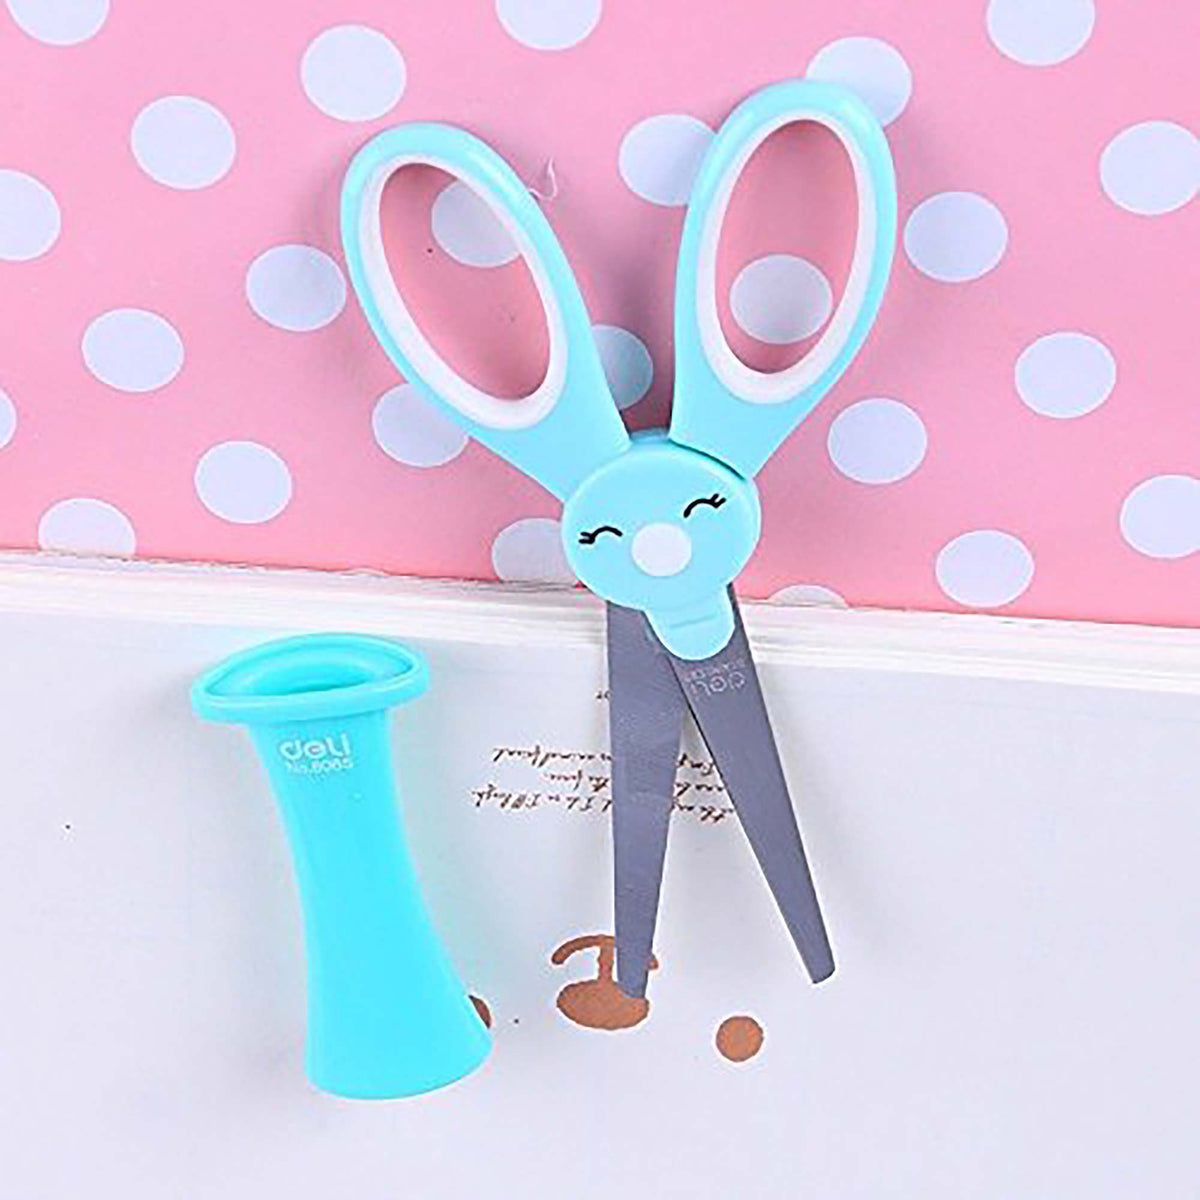 Rabbit-Shaped Handheld Scissors with Stand - Compact and Fun (Blue)